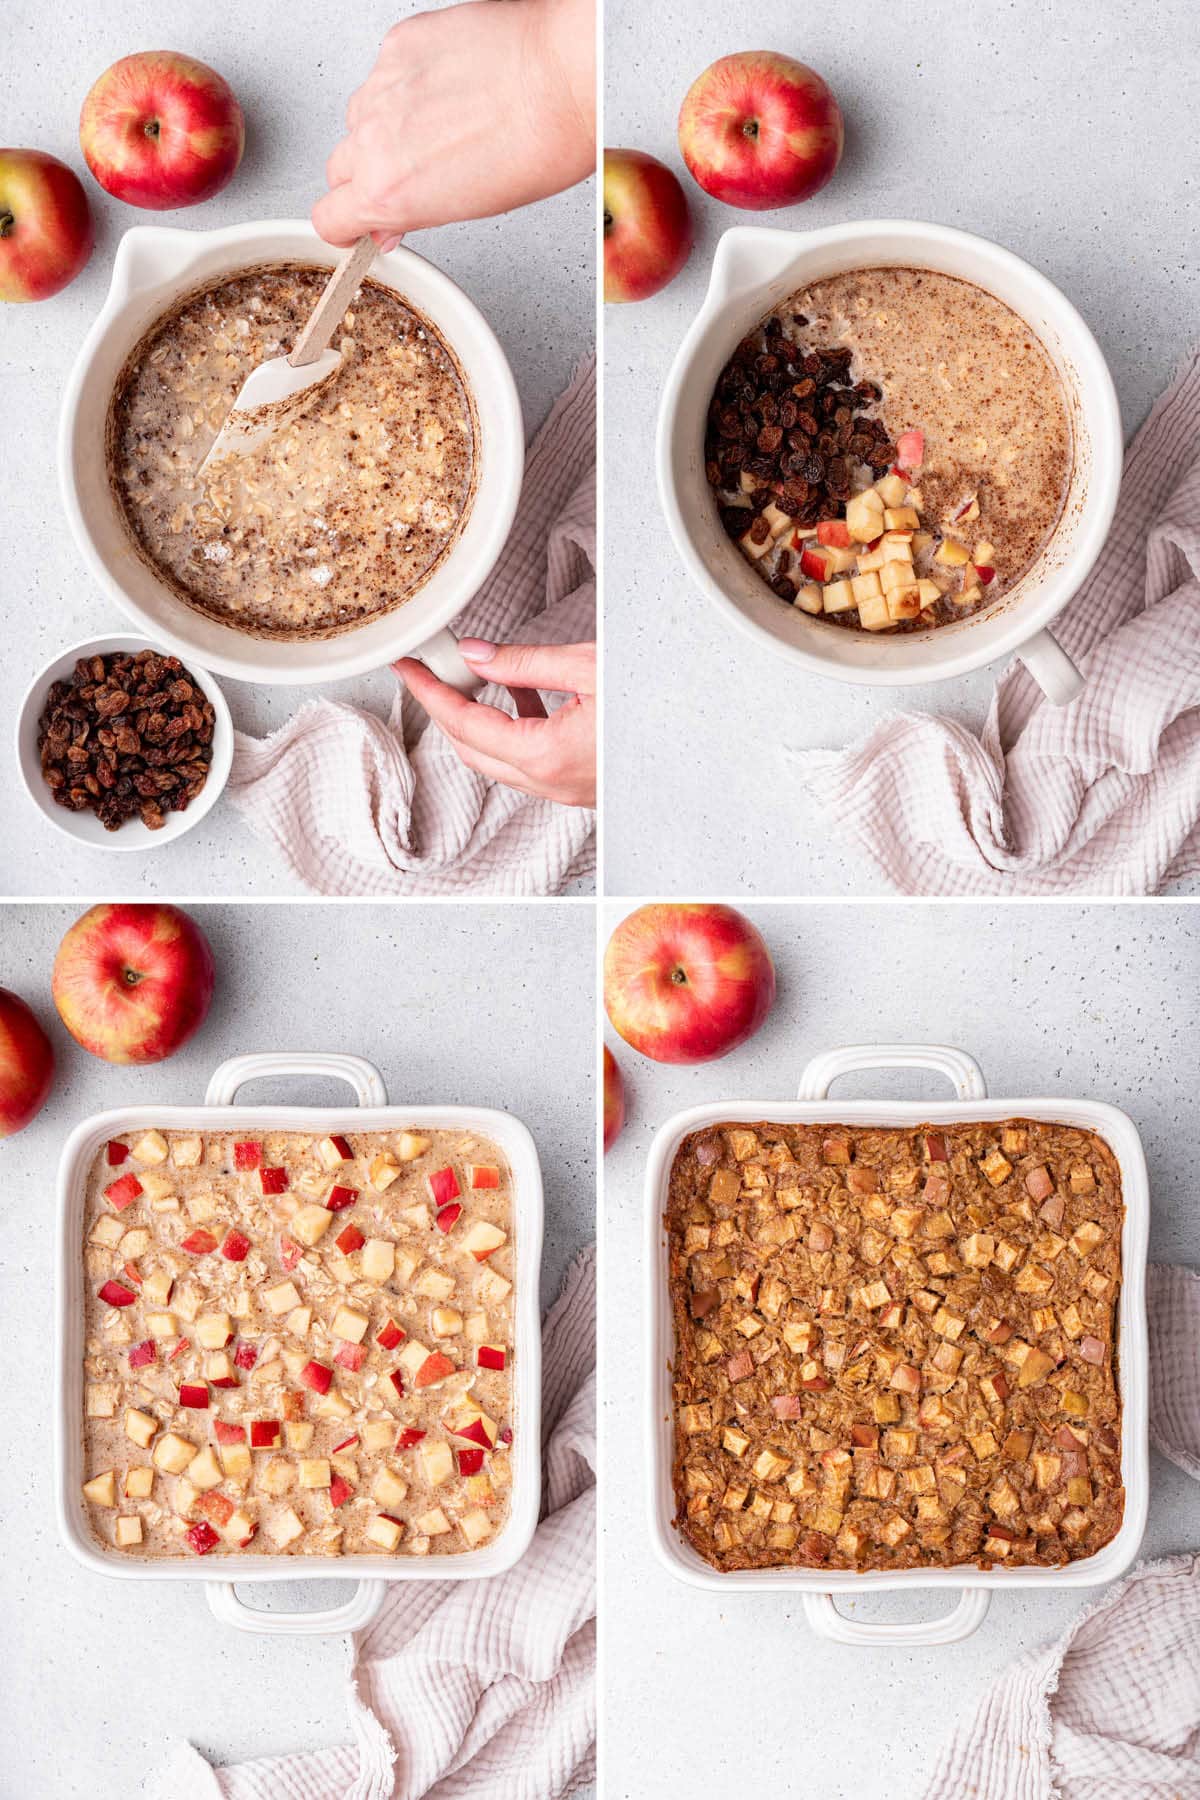 Collage of four photos showing how to make Apple Cinnamon Baked Oatmeal: mixing the oatmeal mixture, adding to a baking dish, topping with apples and baking.